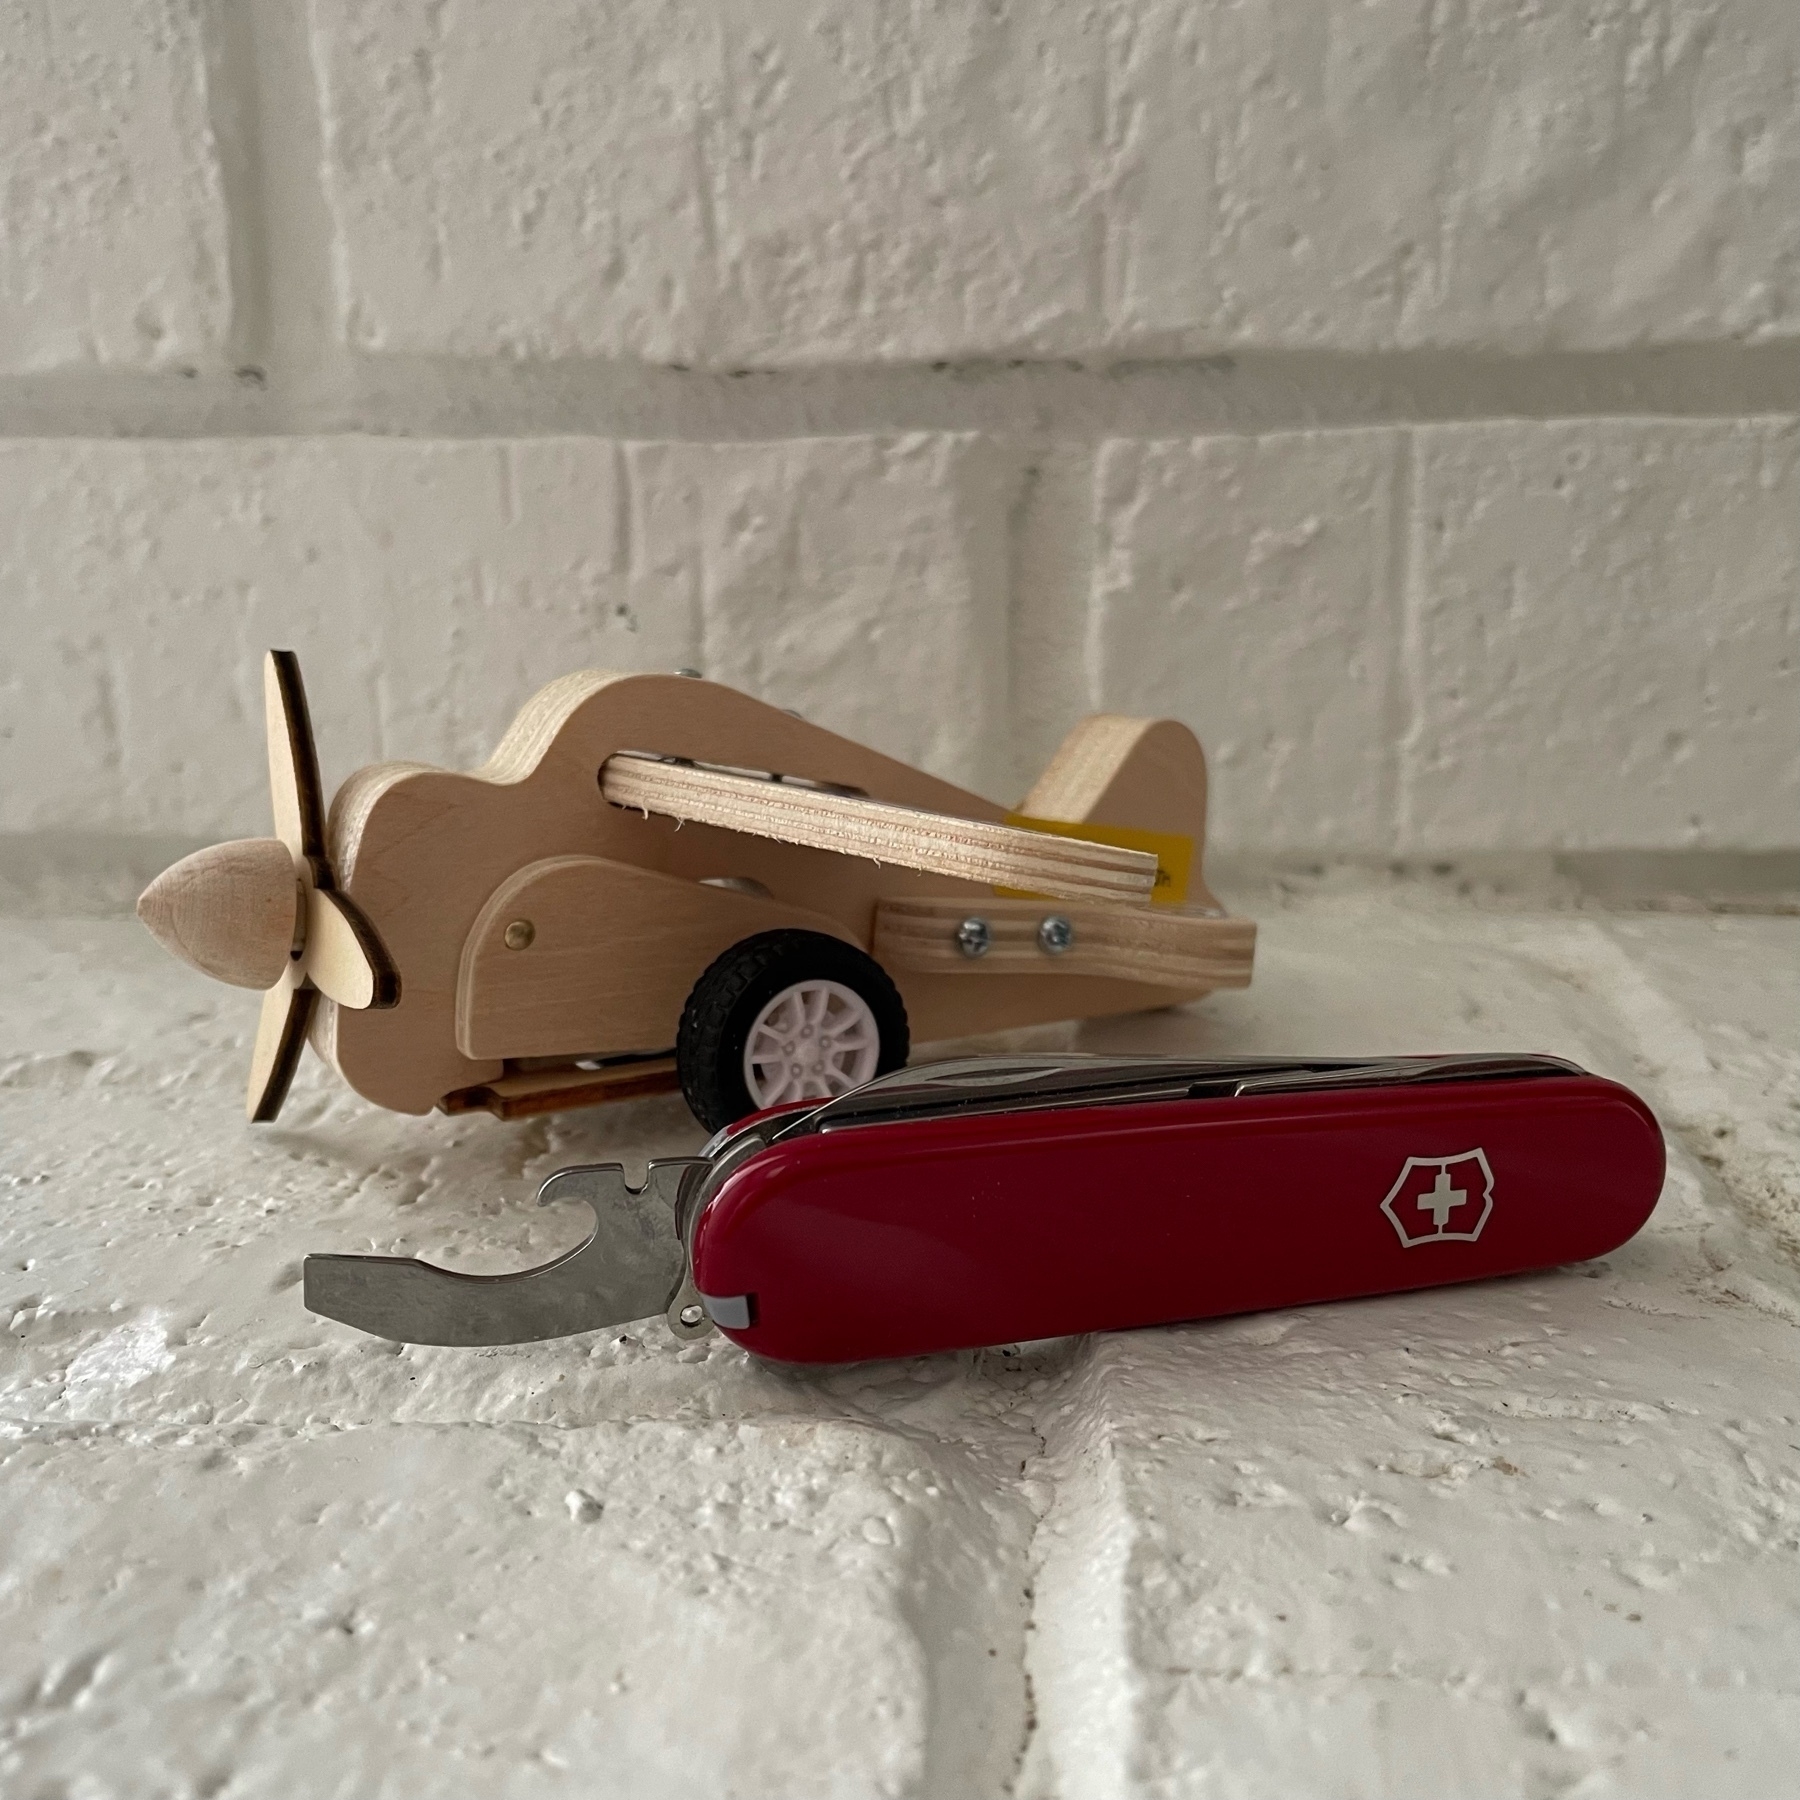 Wooden airplane and Swiss Army Knife